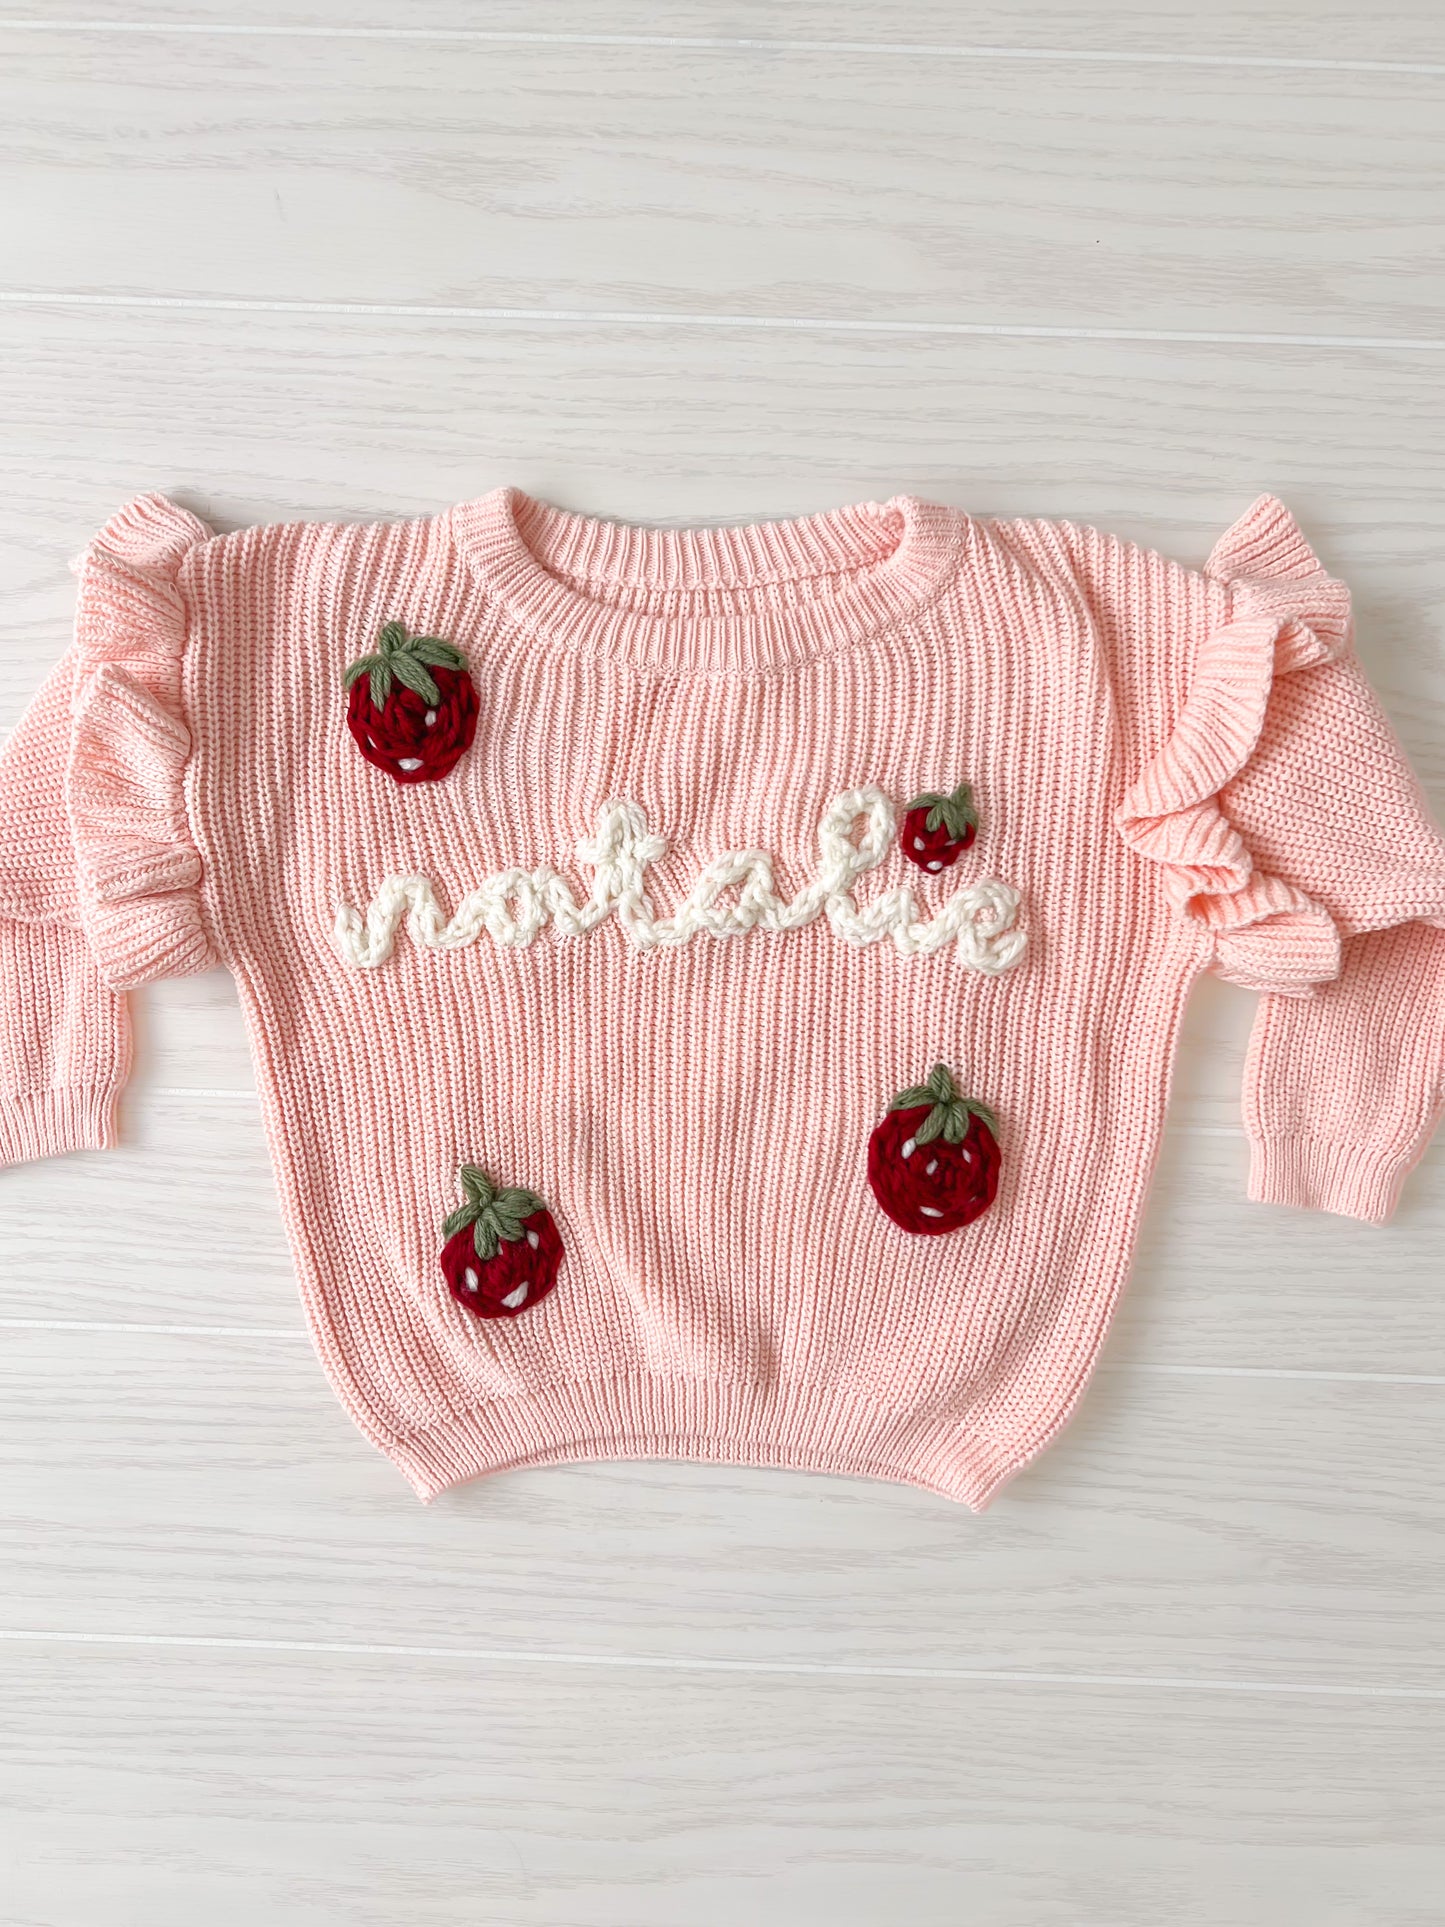 Ruffle Knit Sweater with name AND design